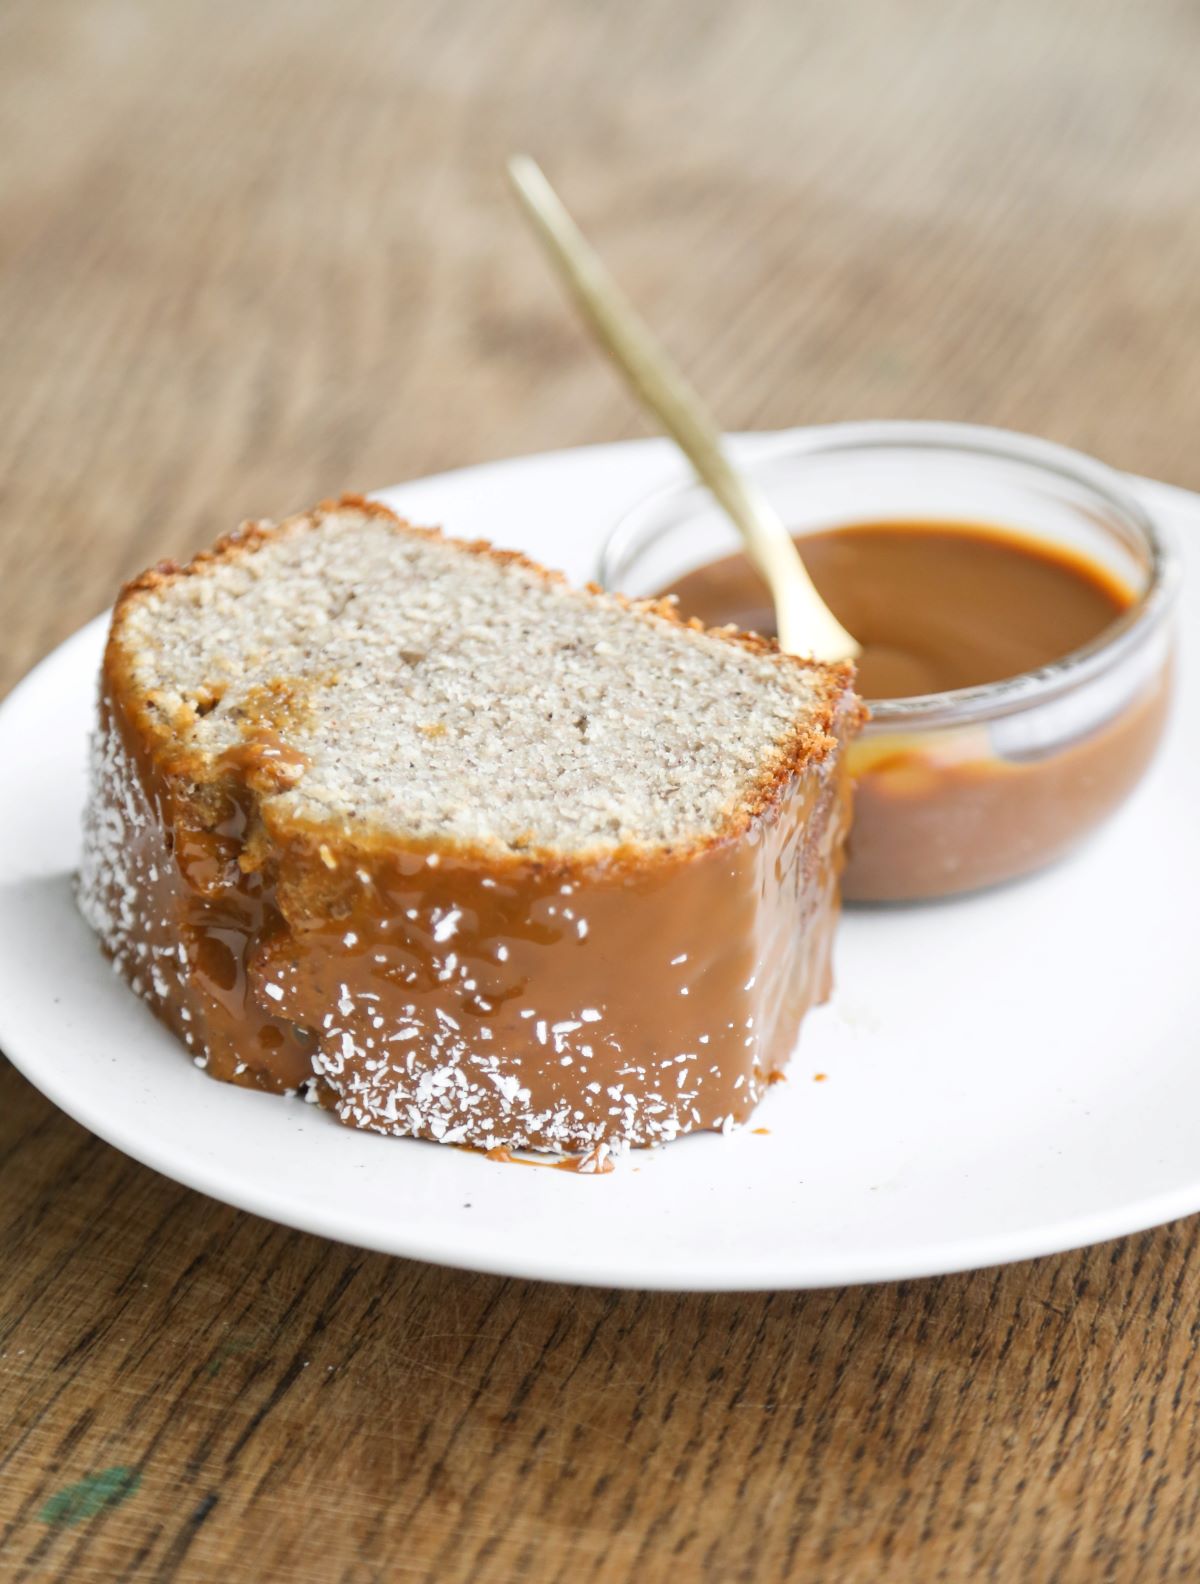 Slice of banana loaf cake with a dip of dulce de leche on a white plate on a wooden surface.